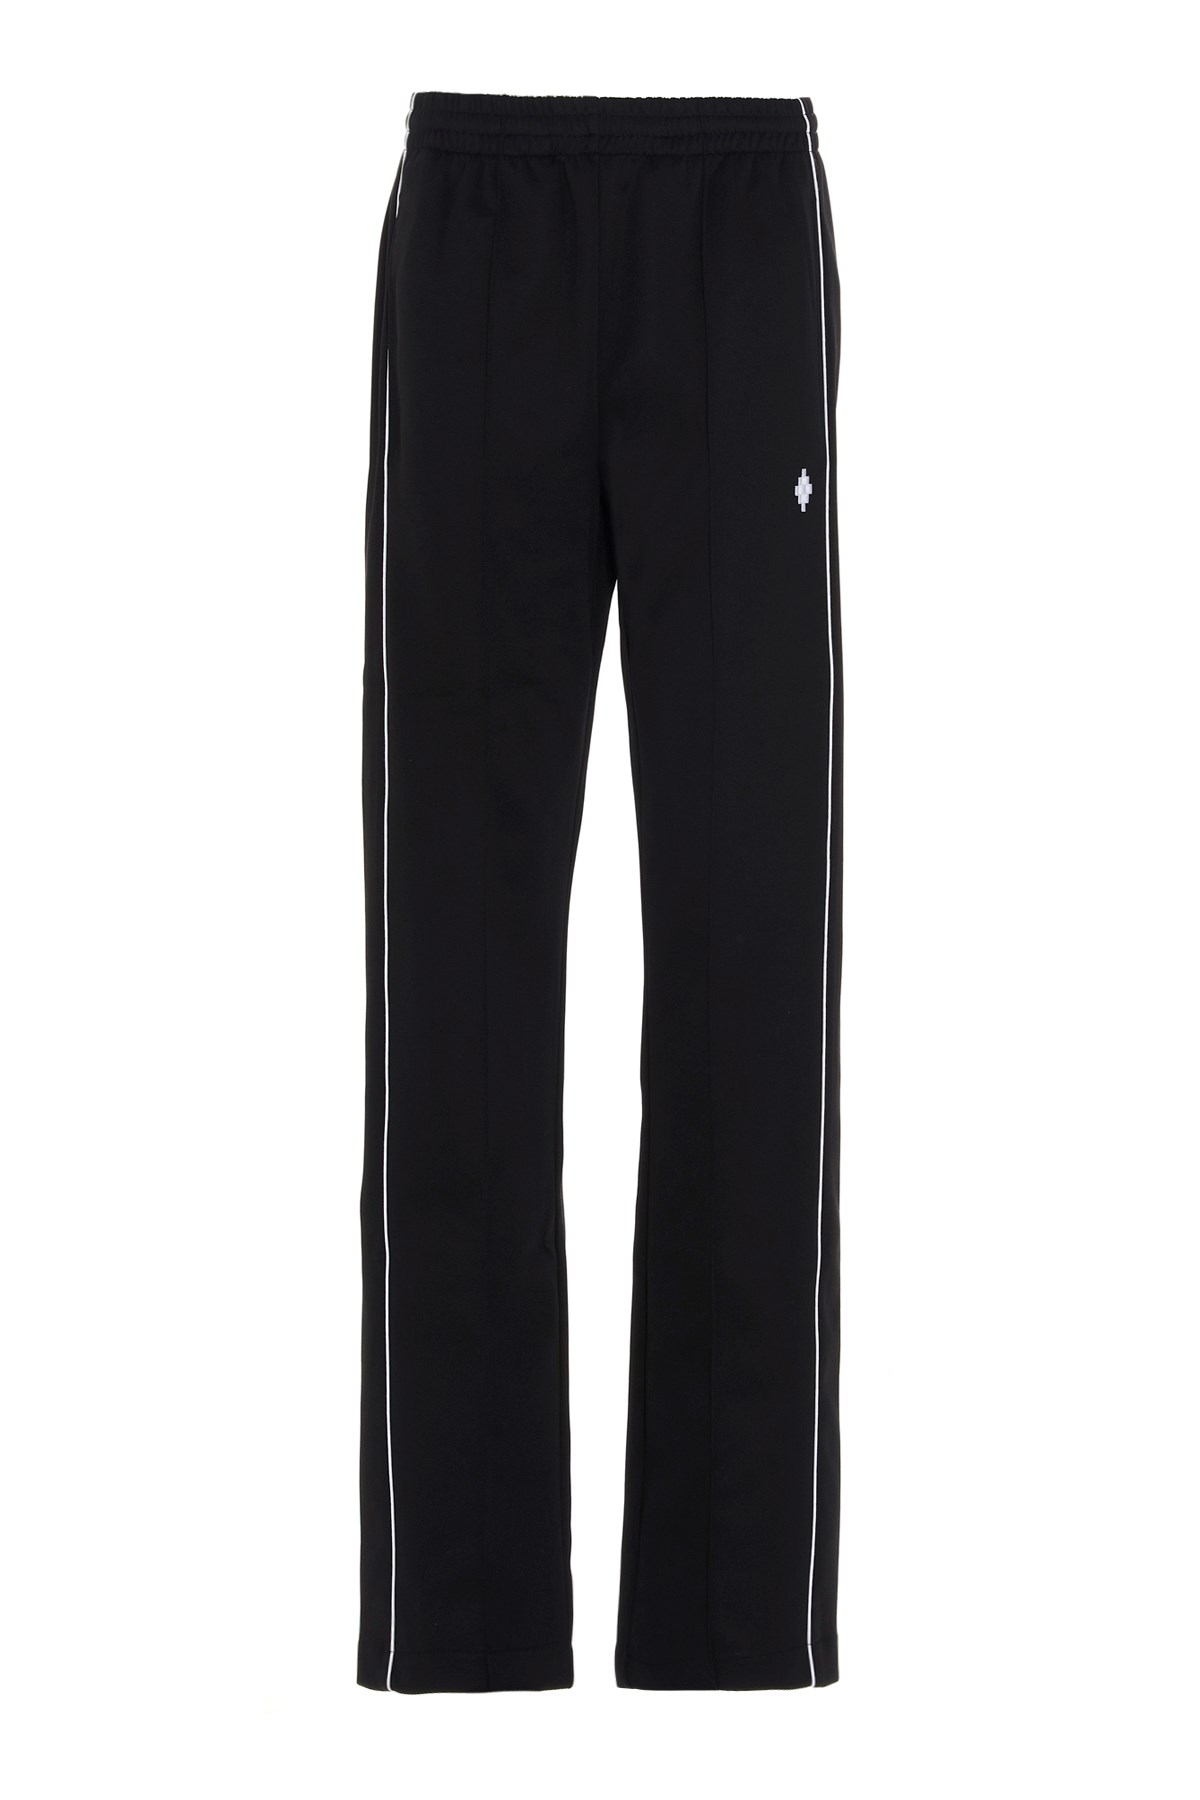 MARCELO BURLON - COUNTY OF MILAN Sweatpants With Contrast Bands